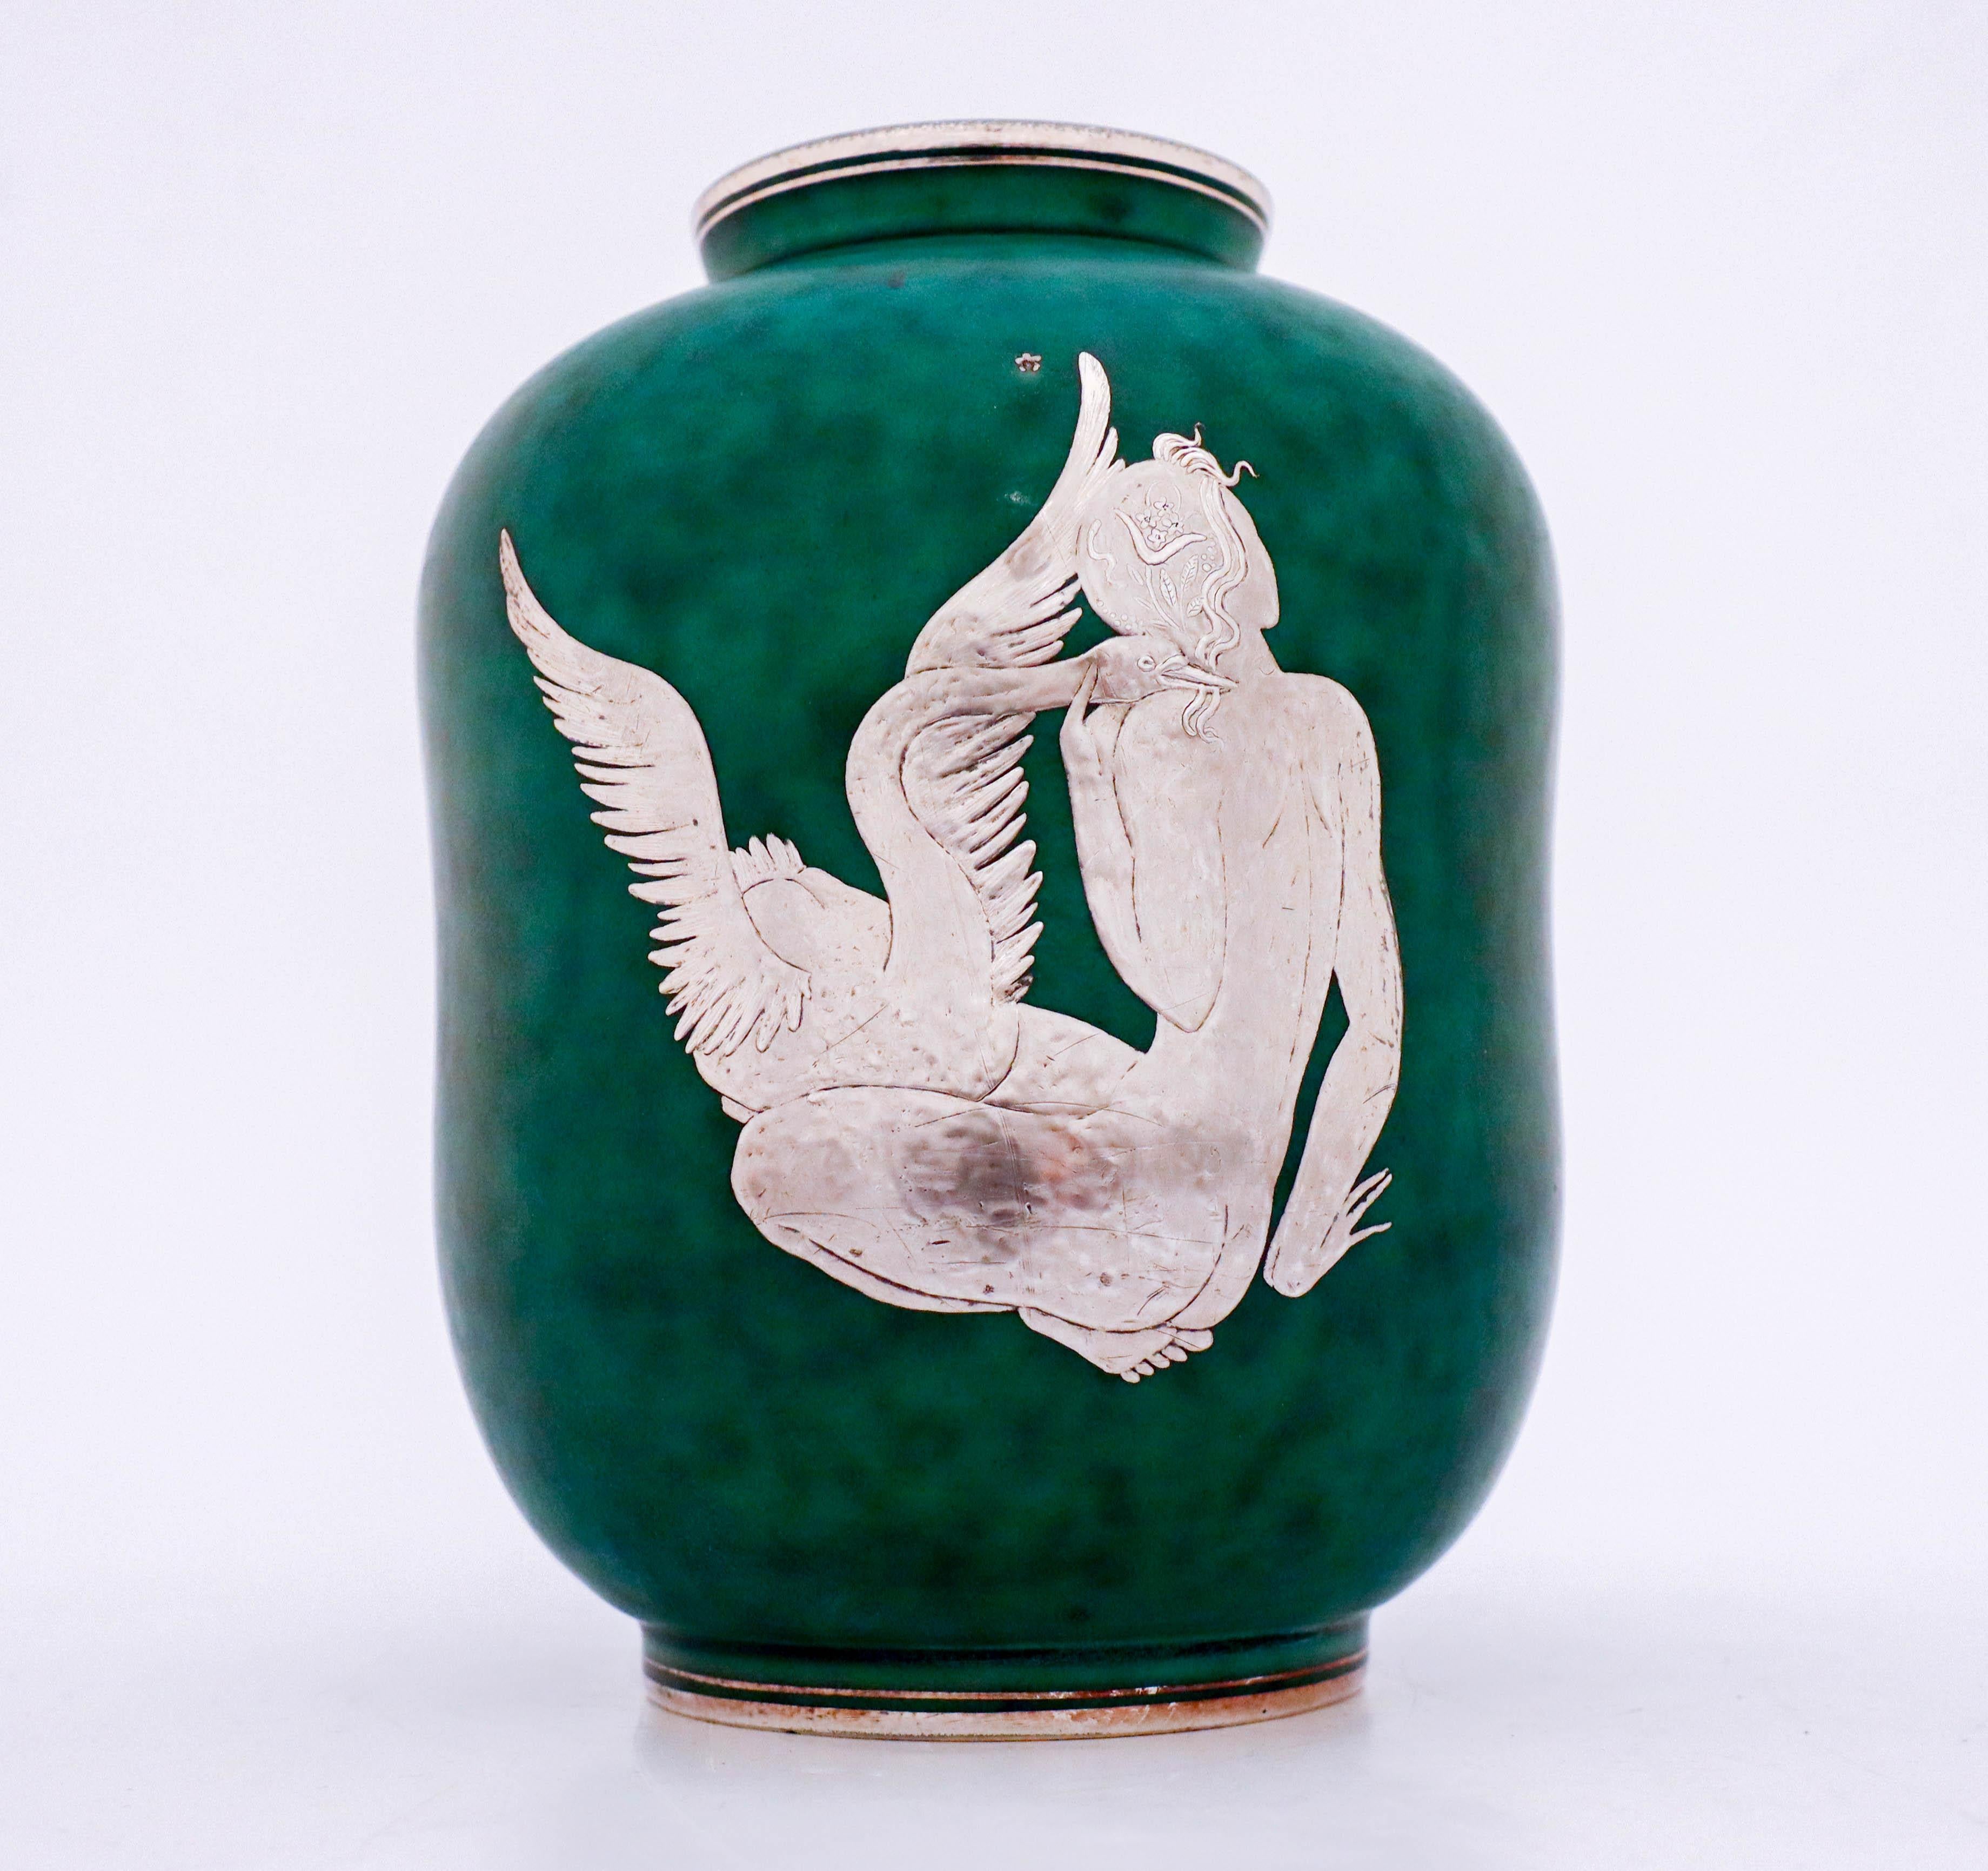 A vase in stoneware of model Argenta designed by Wilhelm Kåge at Gustavsberg with silver decor of a girl with a swan, this vase is 19 cm high and 13.5 cm in diameter. It´s in mint condition and marked as on photo.